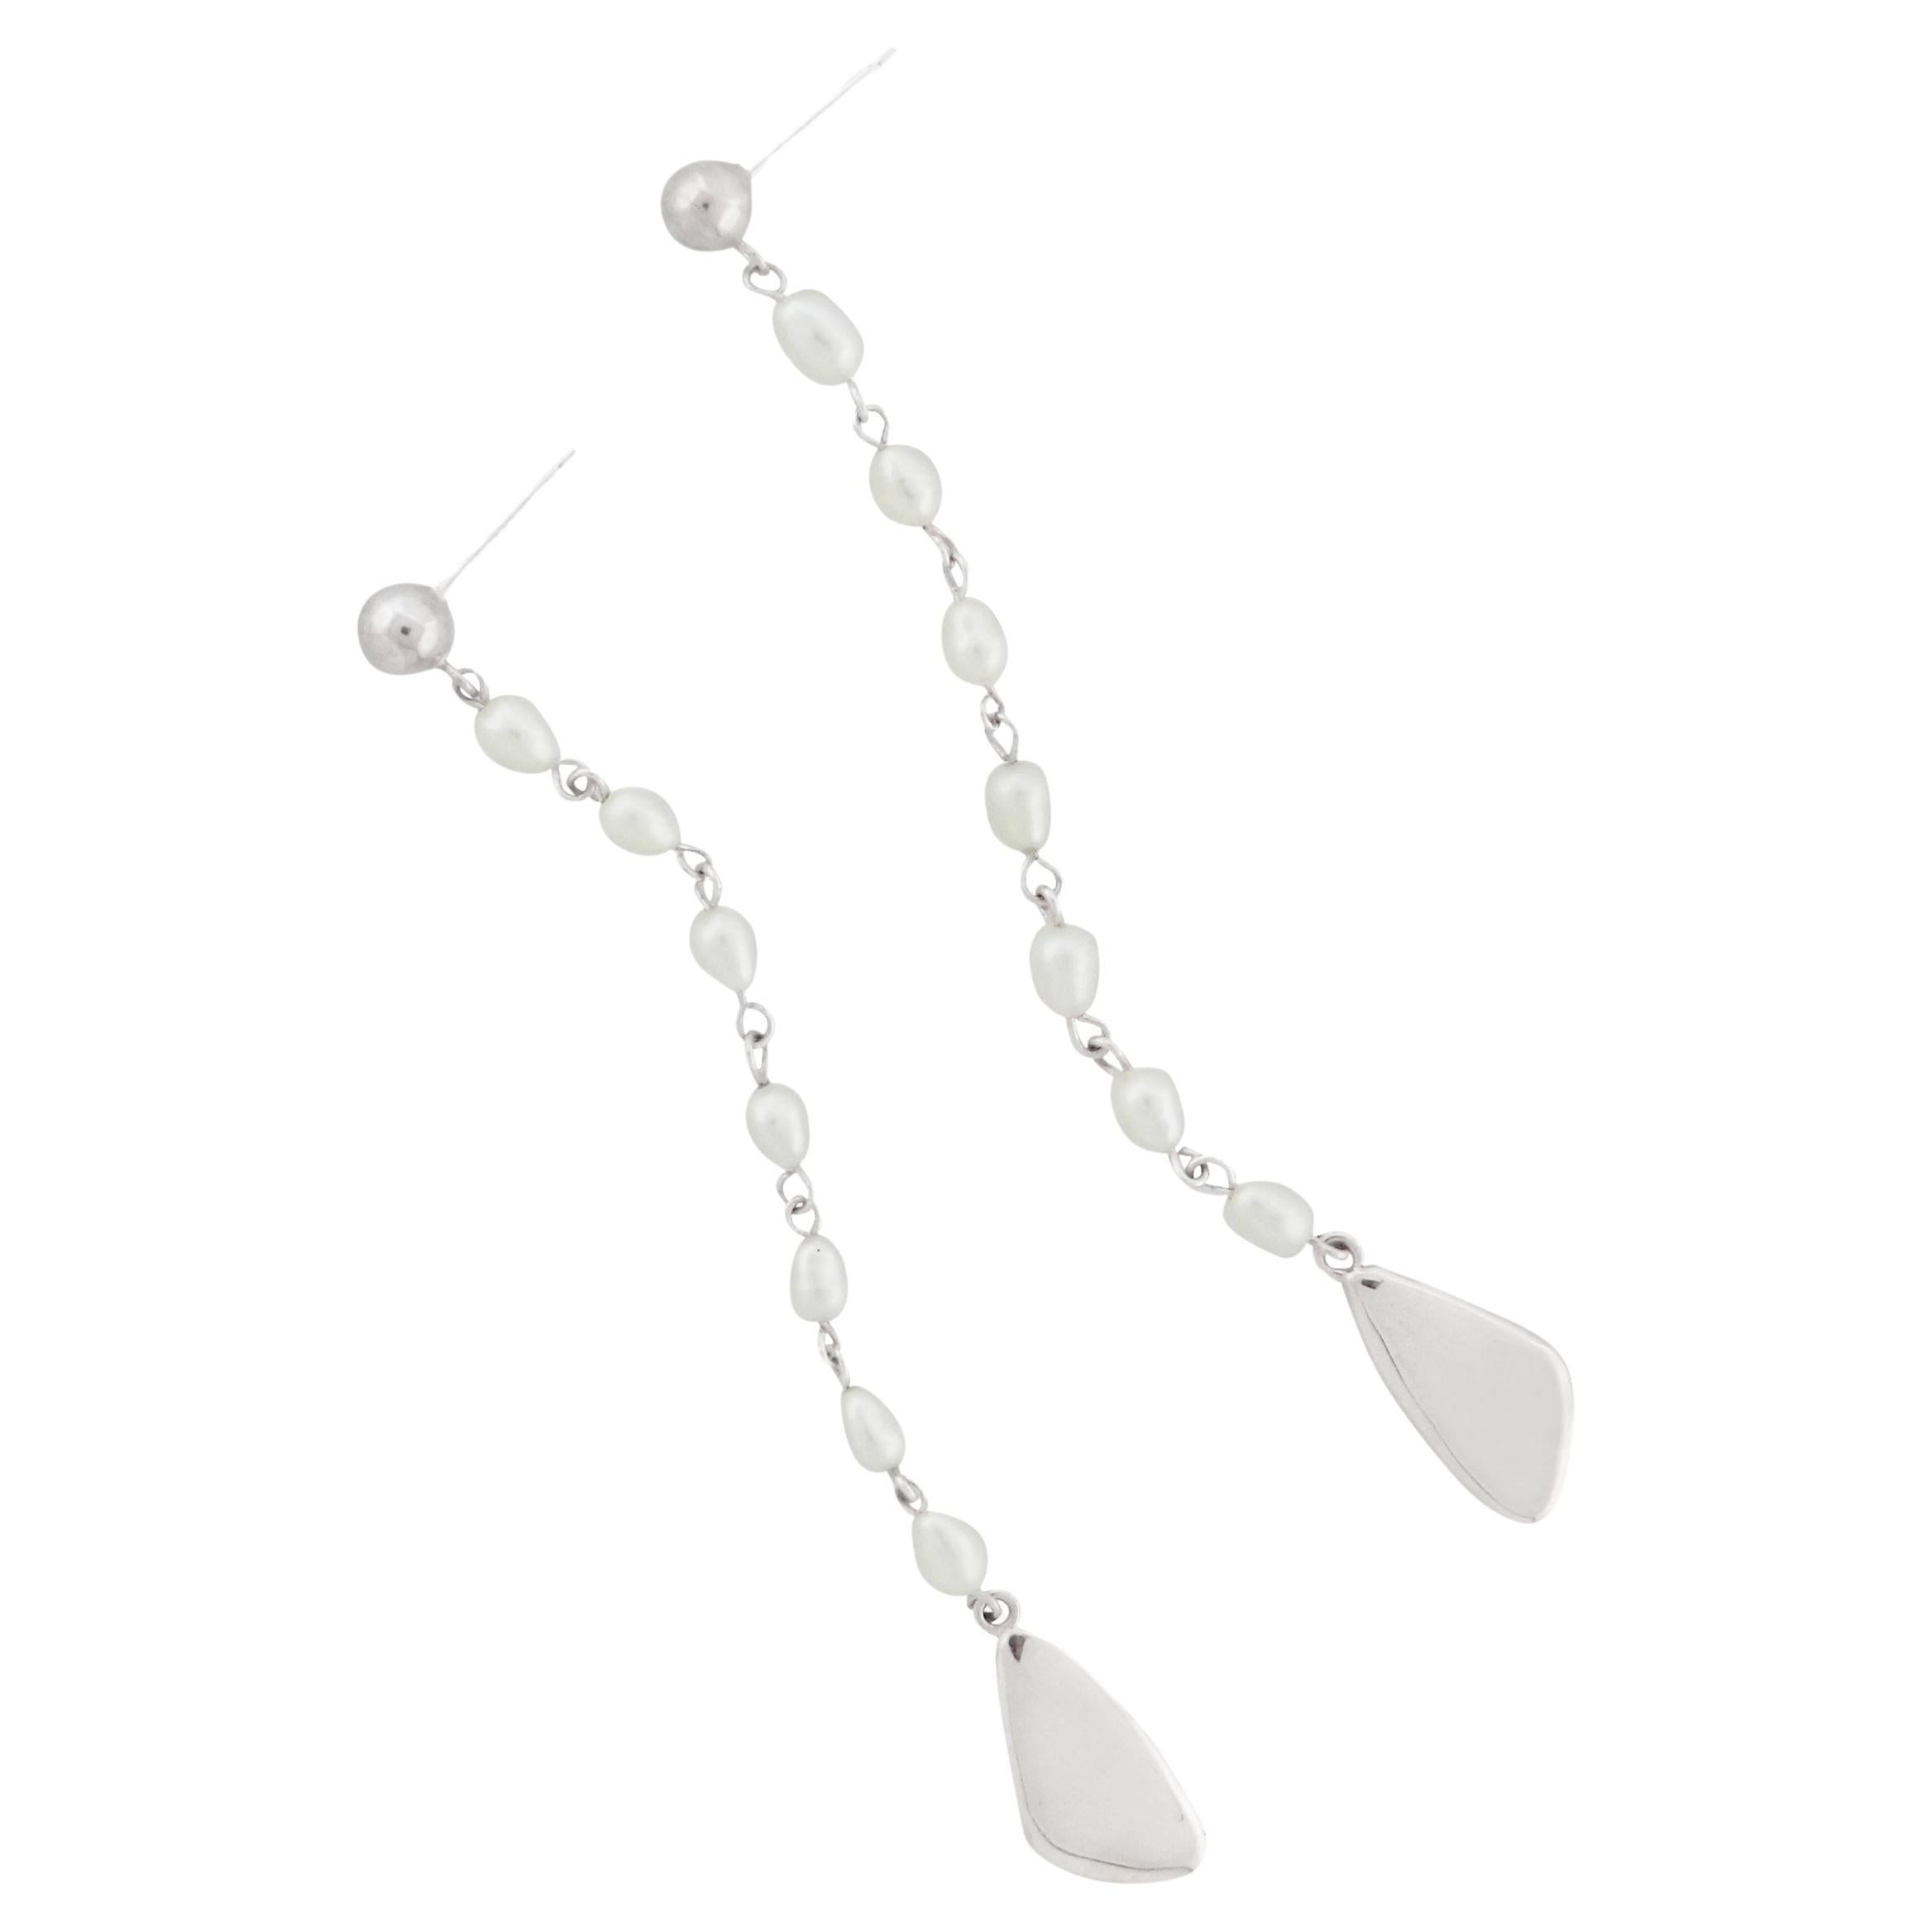 Casey Perez Freshwater Pearl and Sterling Silver Long Linear earrings For Sale